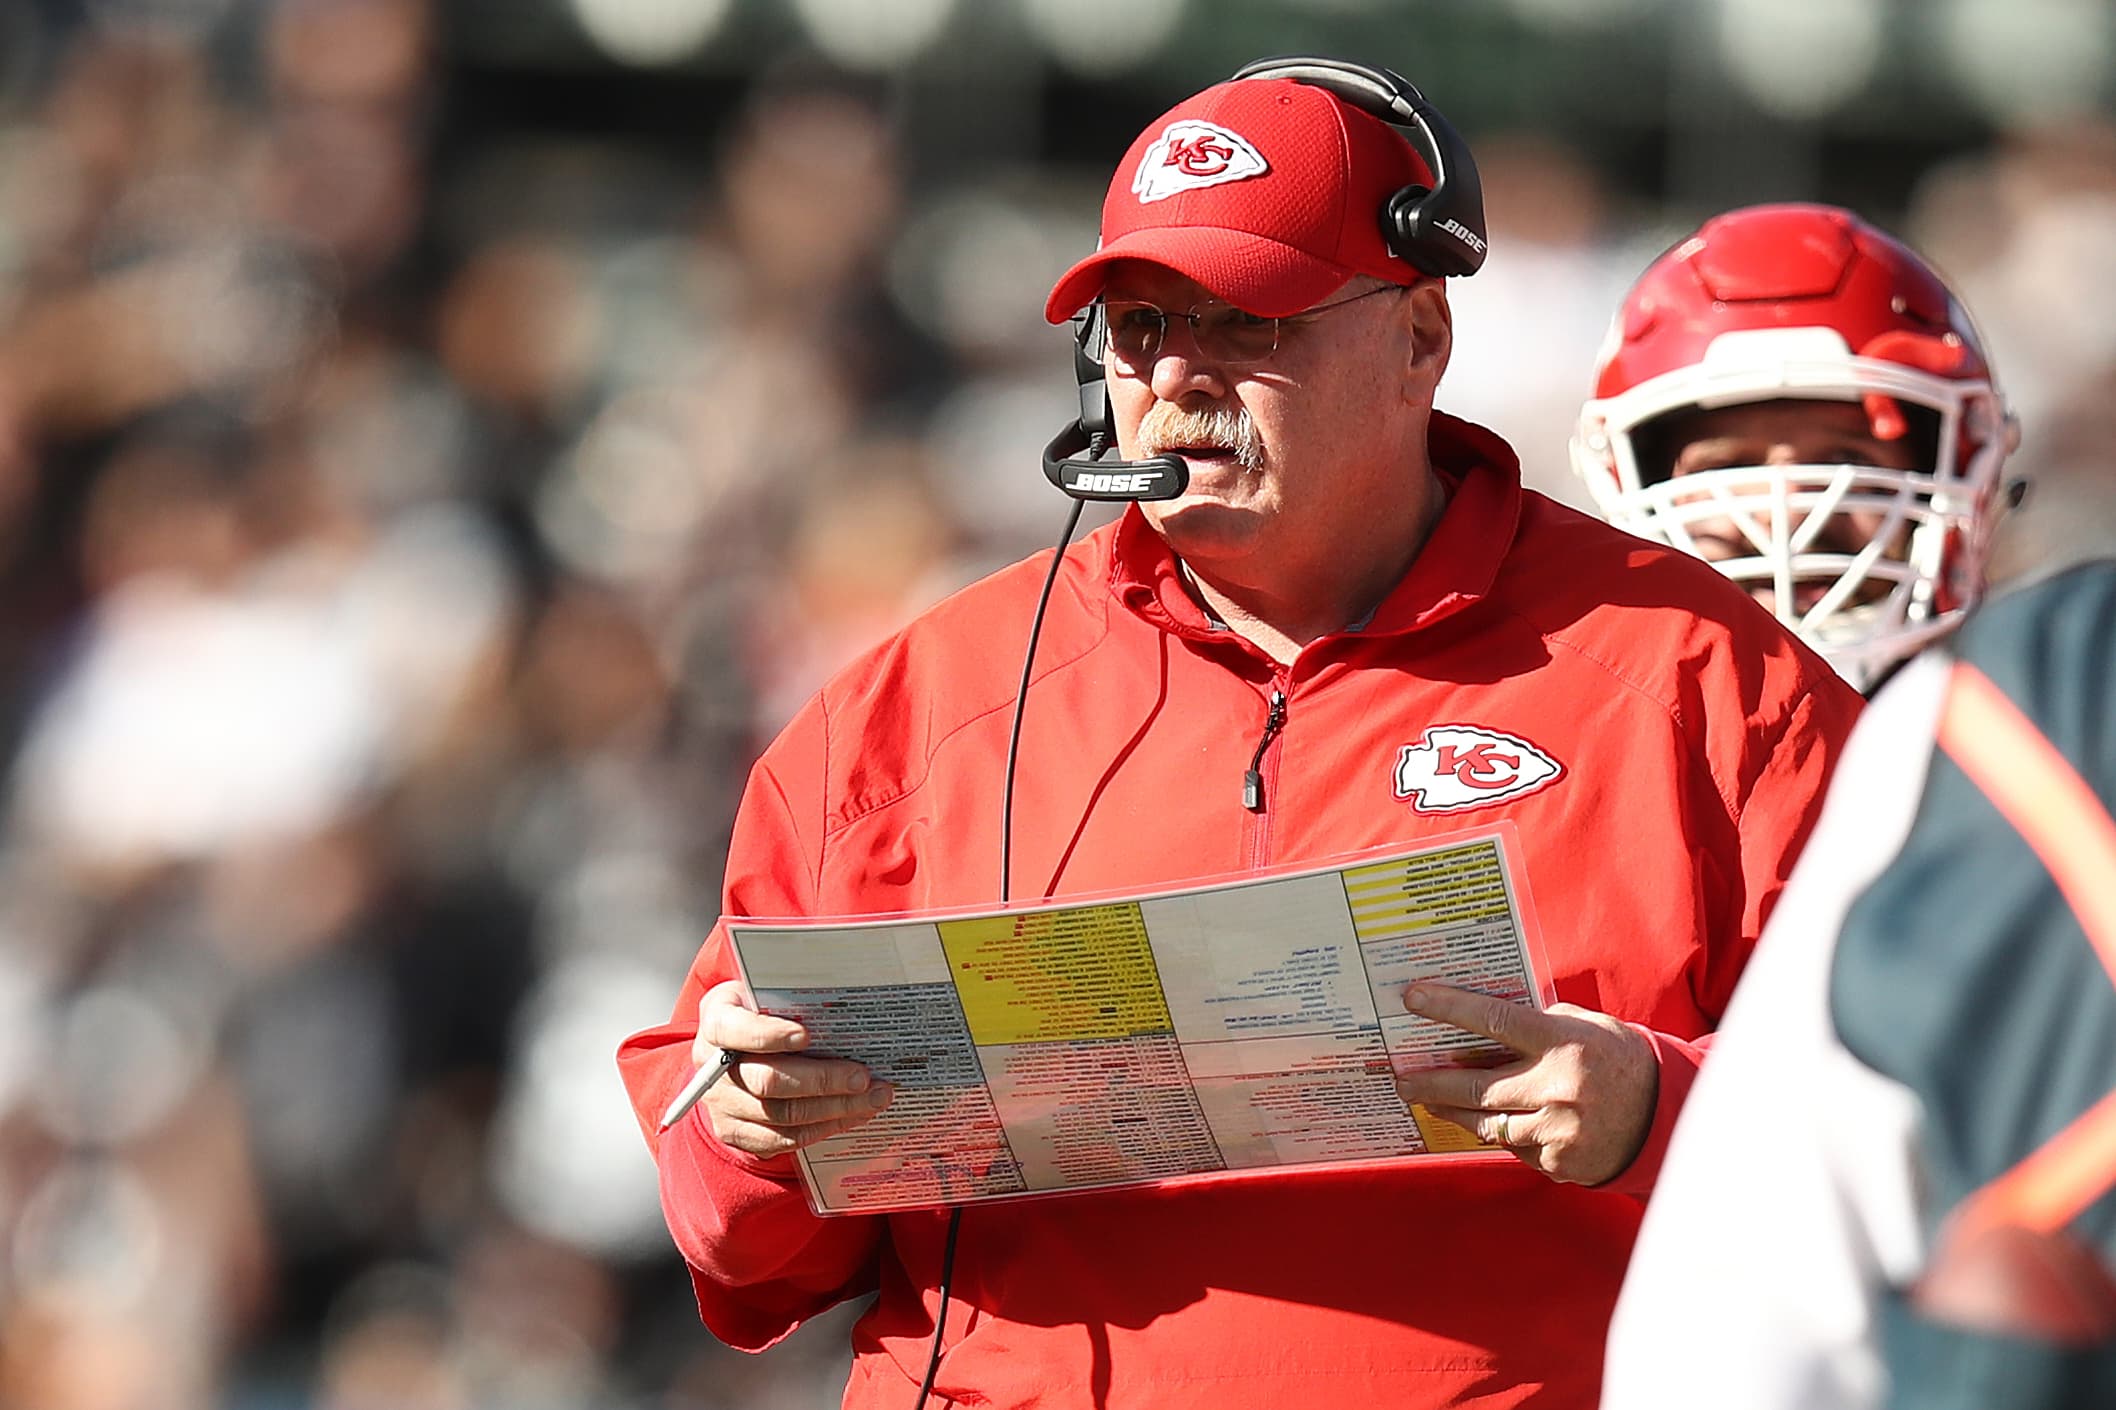 Chiefs' coach Andy Reid still has the car his dad bought for $25